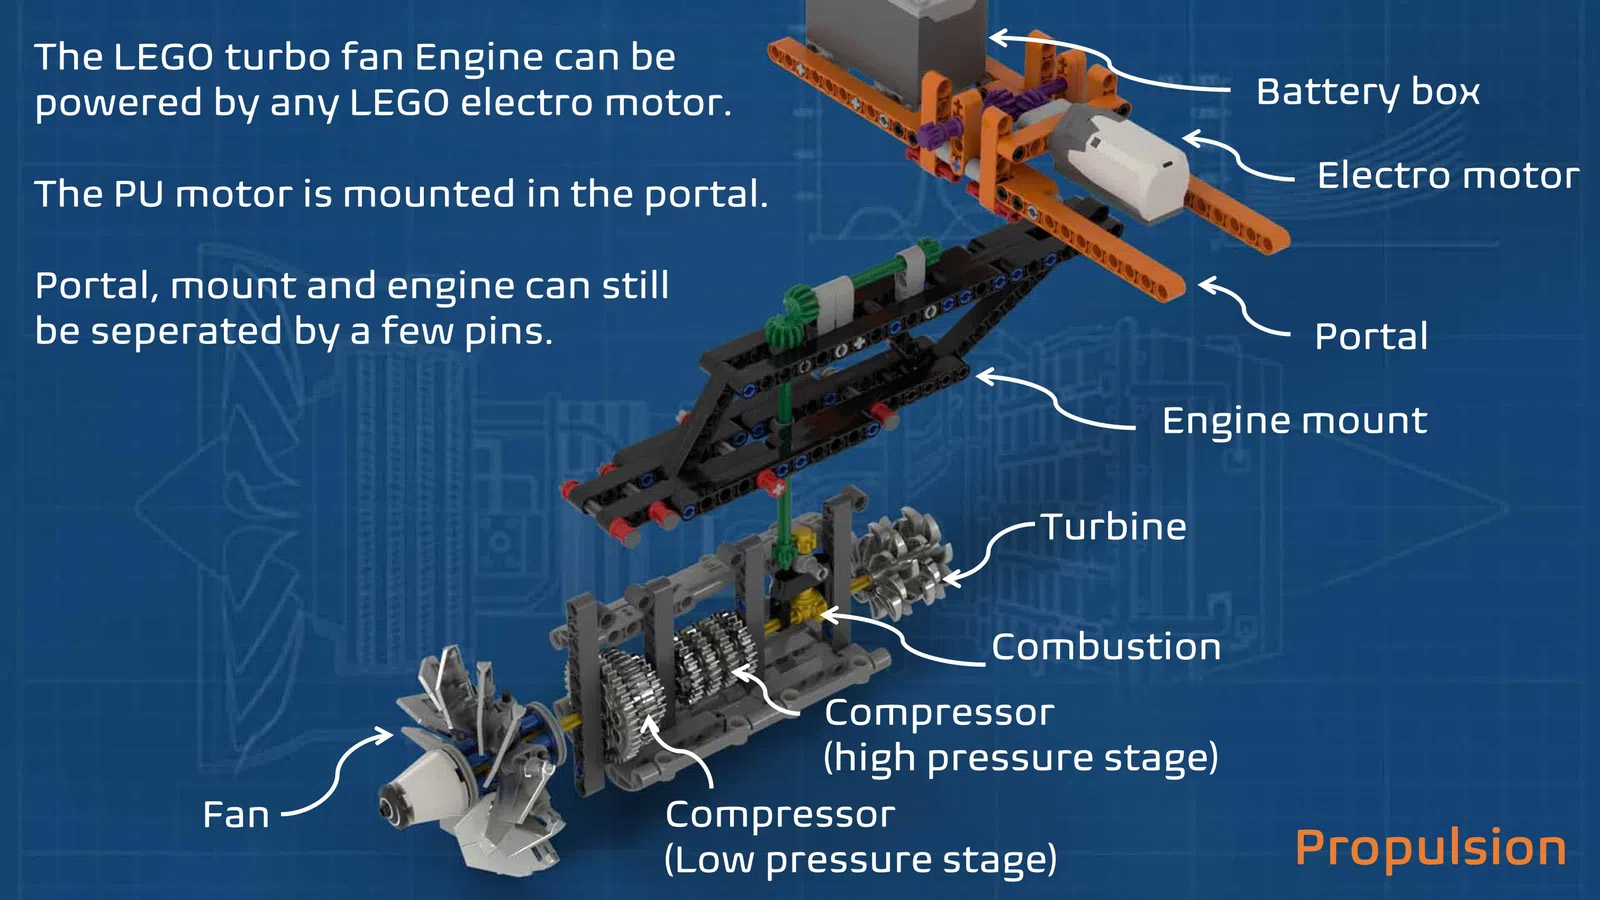 AIRCRAFT ENGINE WORKSHOP. MINI FIG. SCALE & WORKING Achieves 10K Support on LEGO IDEAS